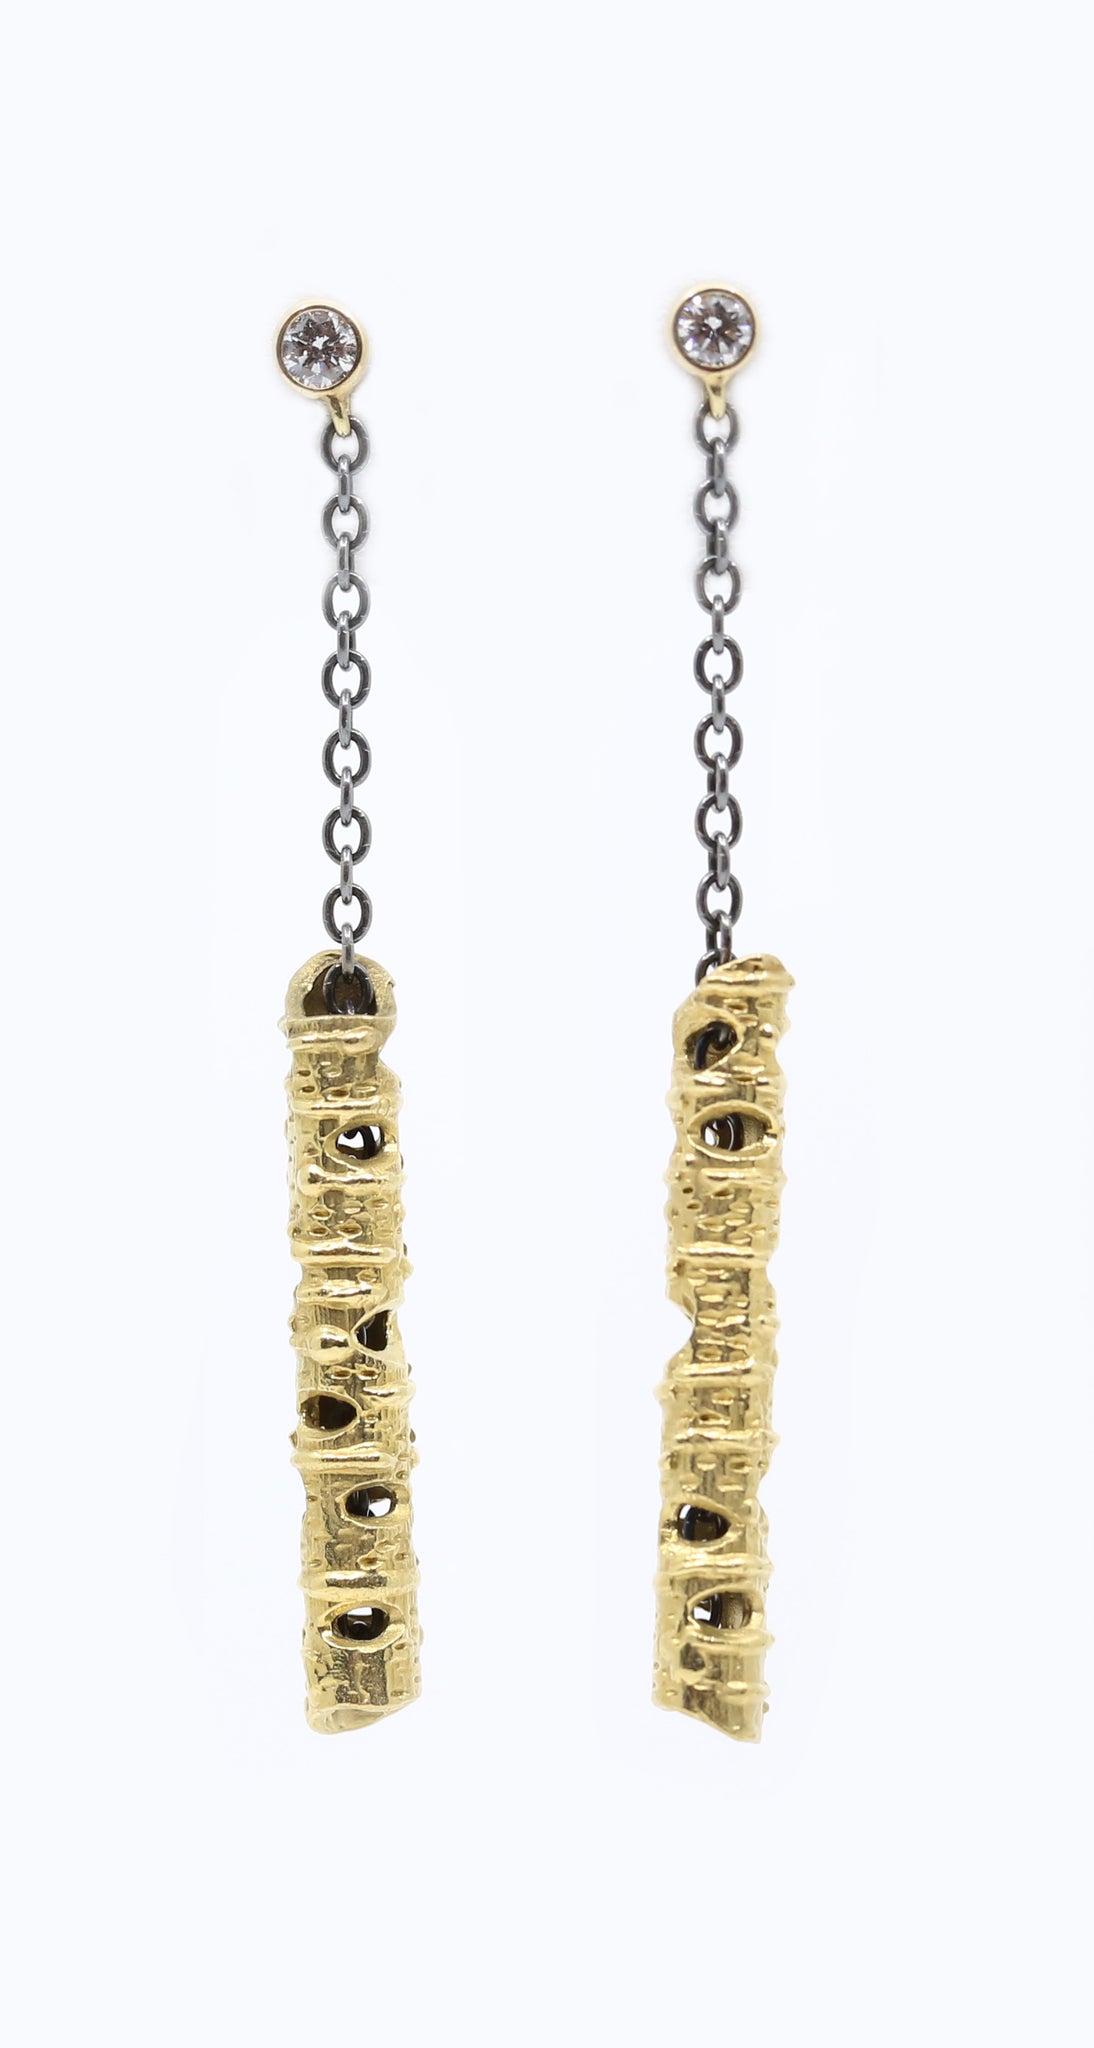 Gold with 1 Diamond on Chain Earrings